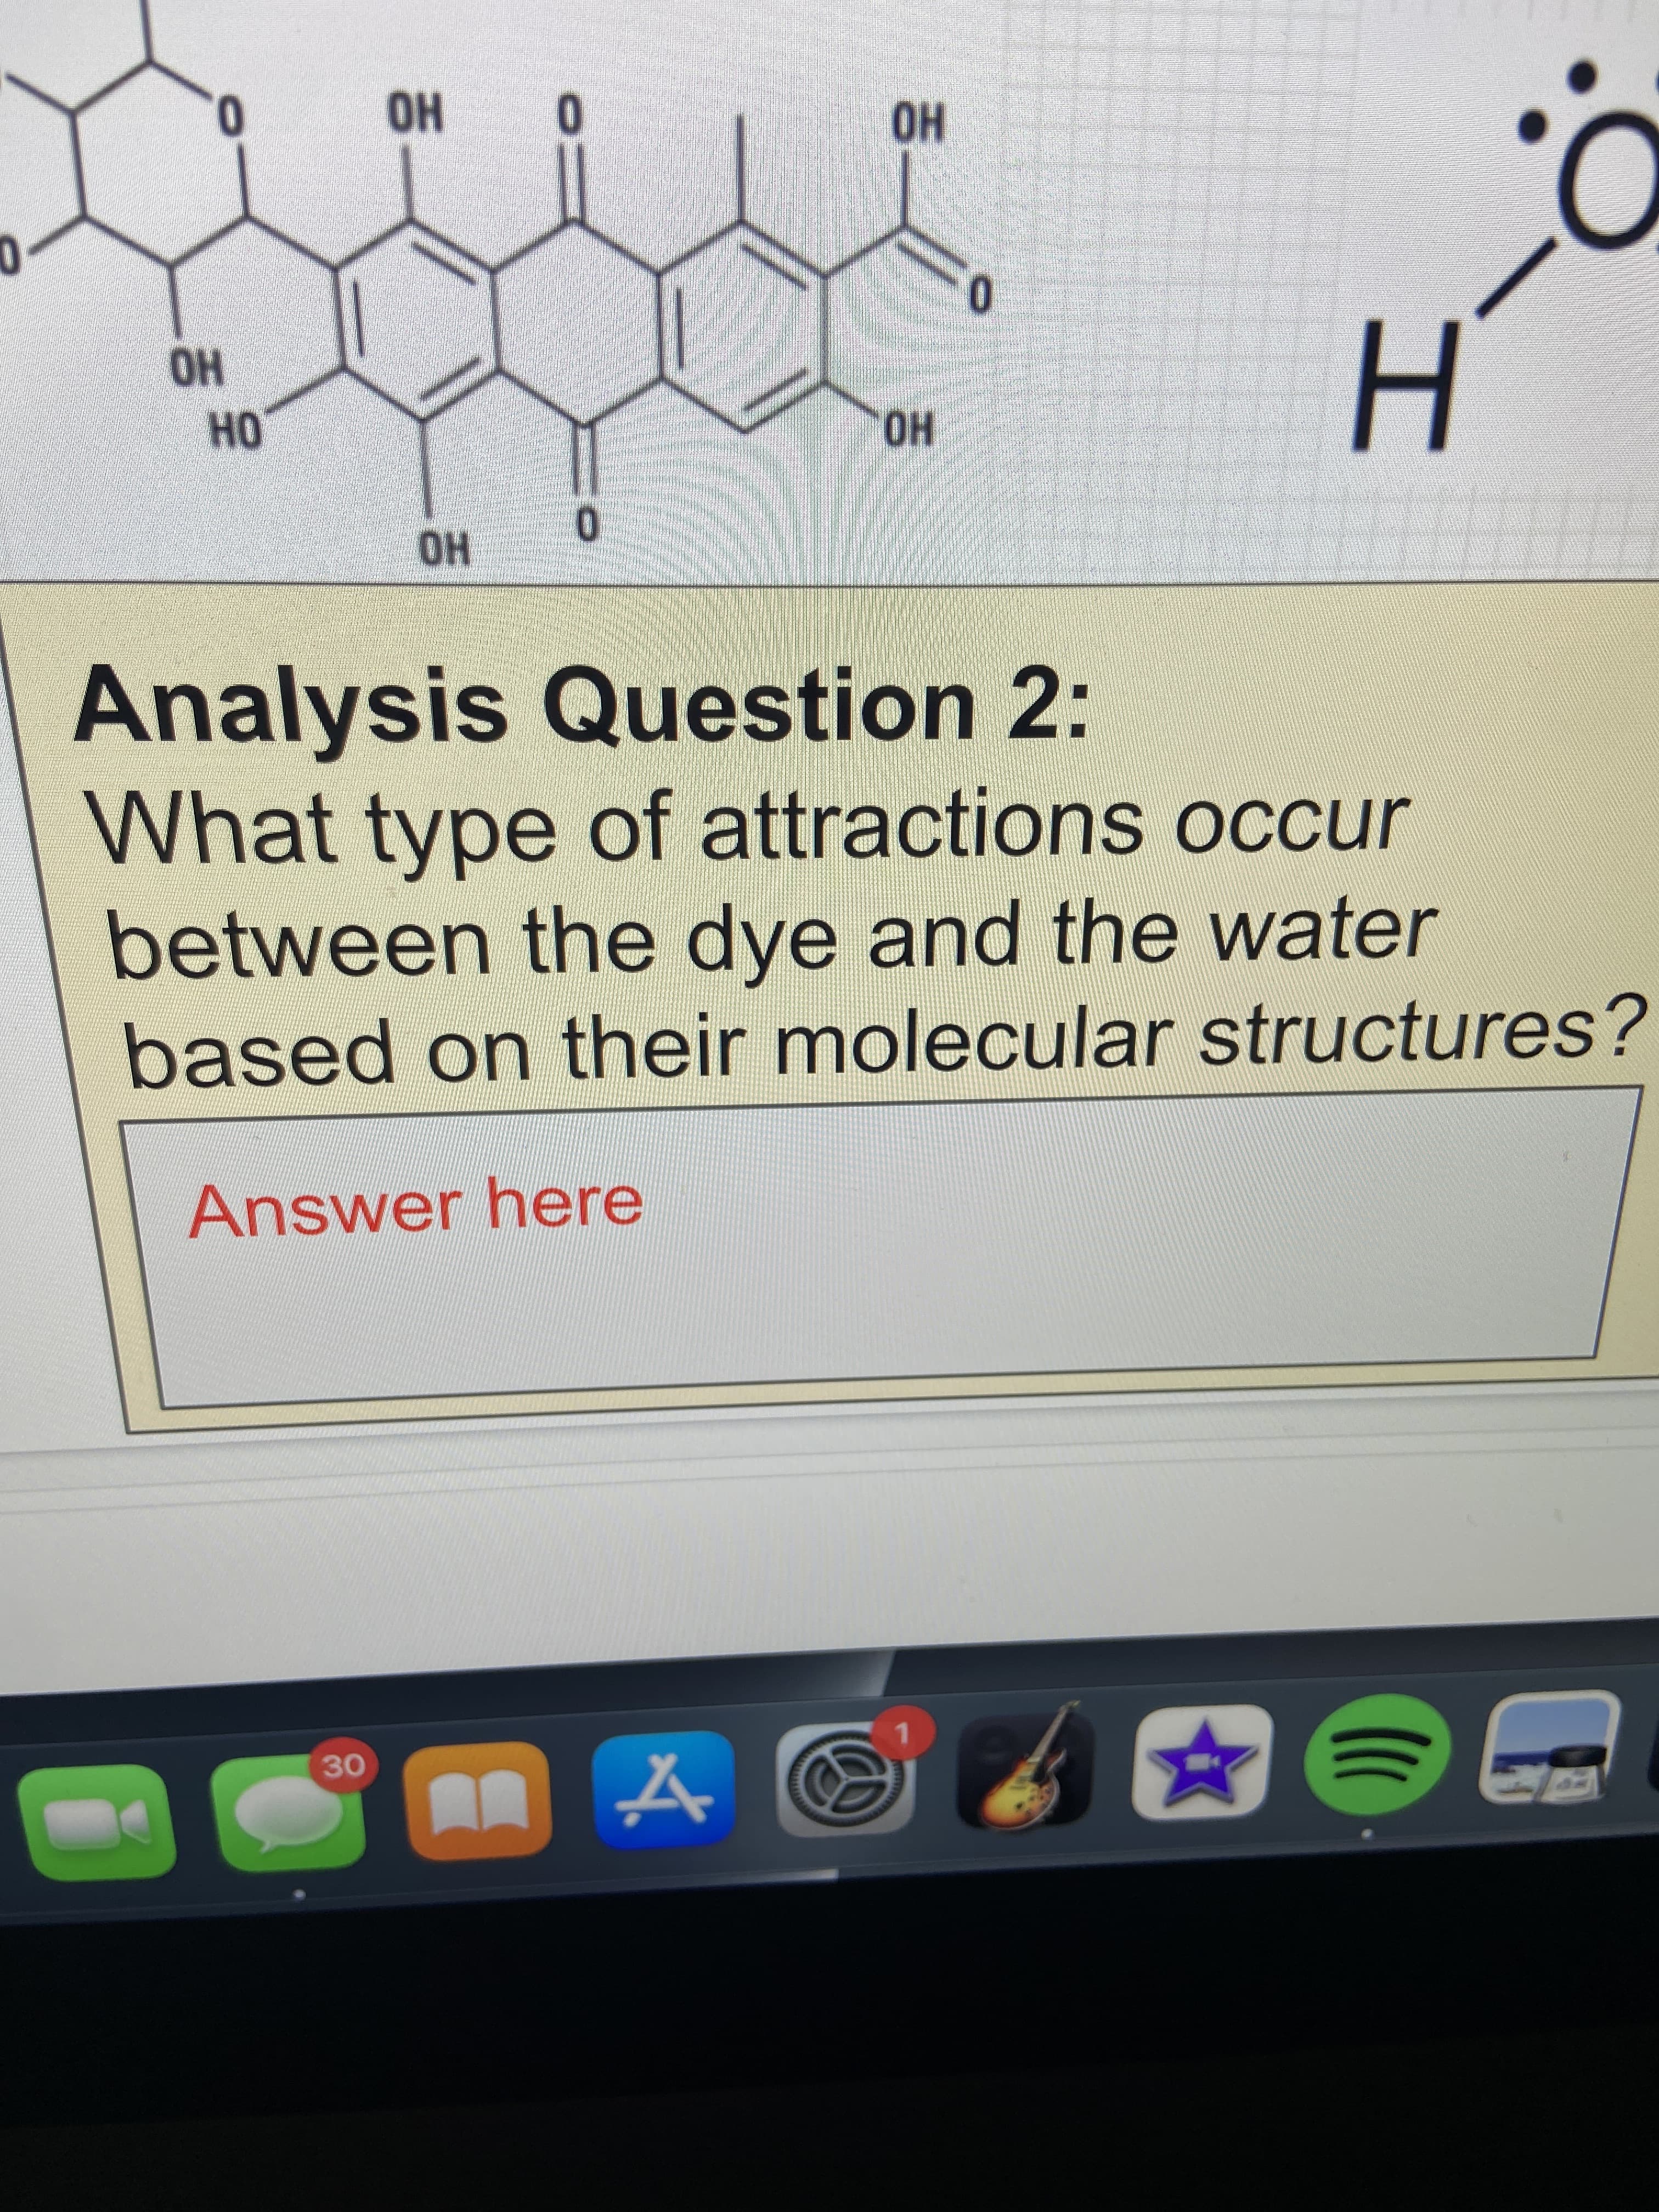 Answer here
based on their molecular structures?
between the dye and the water
What type of attractions occur
Analysis Question 2:
HO
OH
HO
HO
HO
Но
0,
